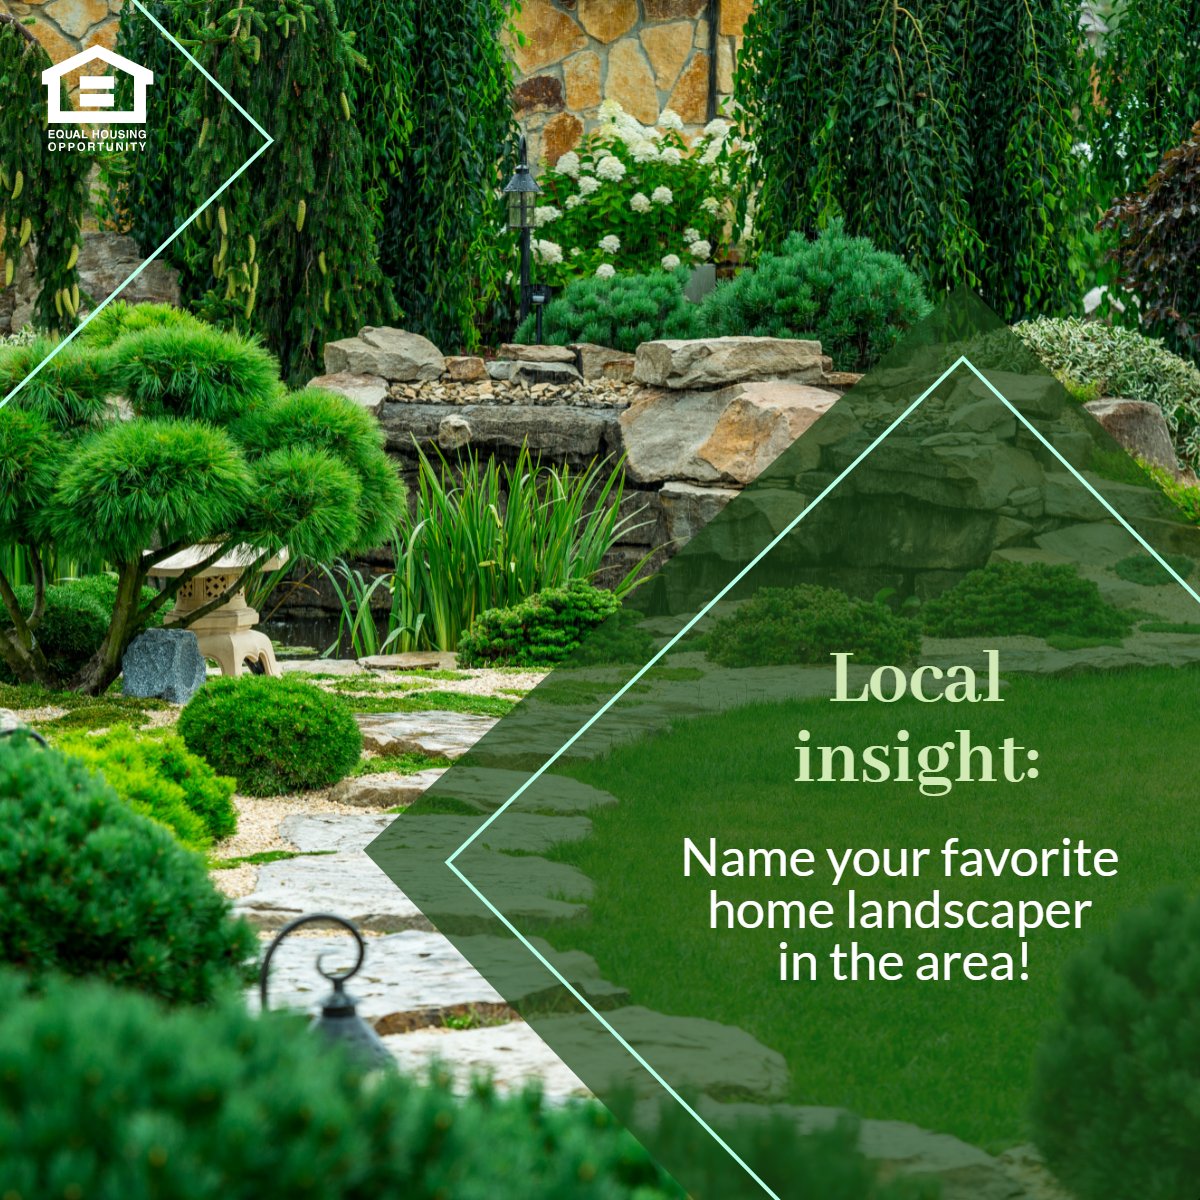 Good landscaping has several important functions and provides numerous benefits. 

Do you have any recommendations? 

Share them below!

#HomeGoals #HomeImprovement
 #homeownershipmatters #homeownershipgoals #ExperienceitMatters #MountainLifeStyle #HomeTown